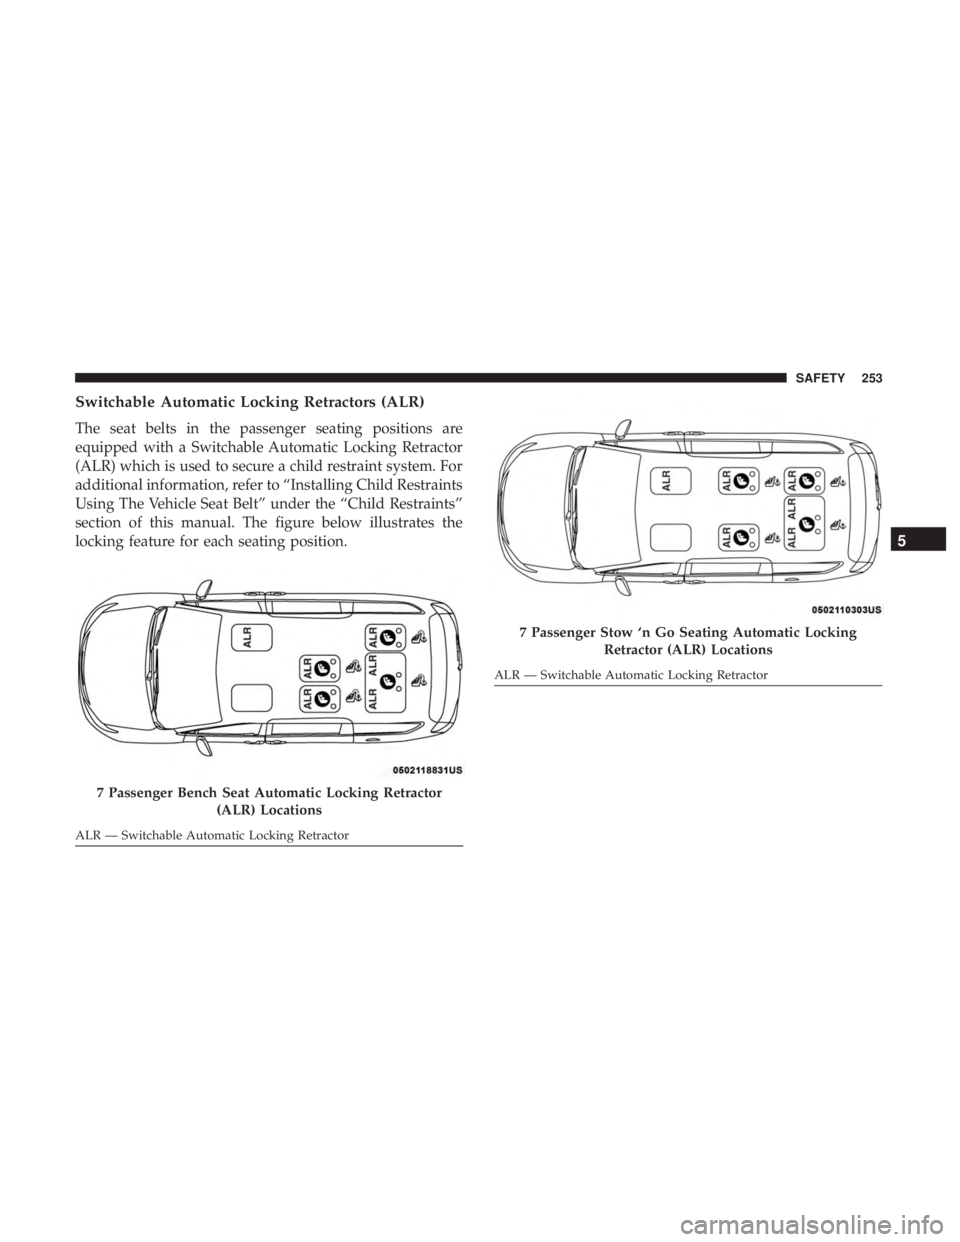 CHRYSLER PACIFICA 2018  Owners Manual Switchable Automatic Locking Retractors (ALR)
The seat belts in the passenger seating positions are
equipped with a Switchable Automatic Locking Retractor
(ALR) which is used to secure a child restrai